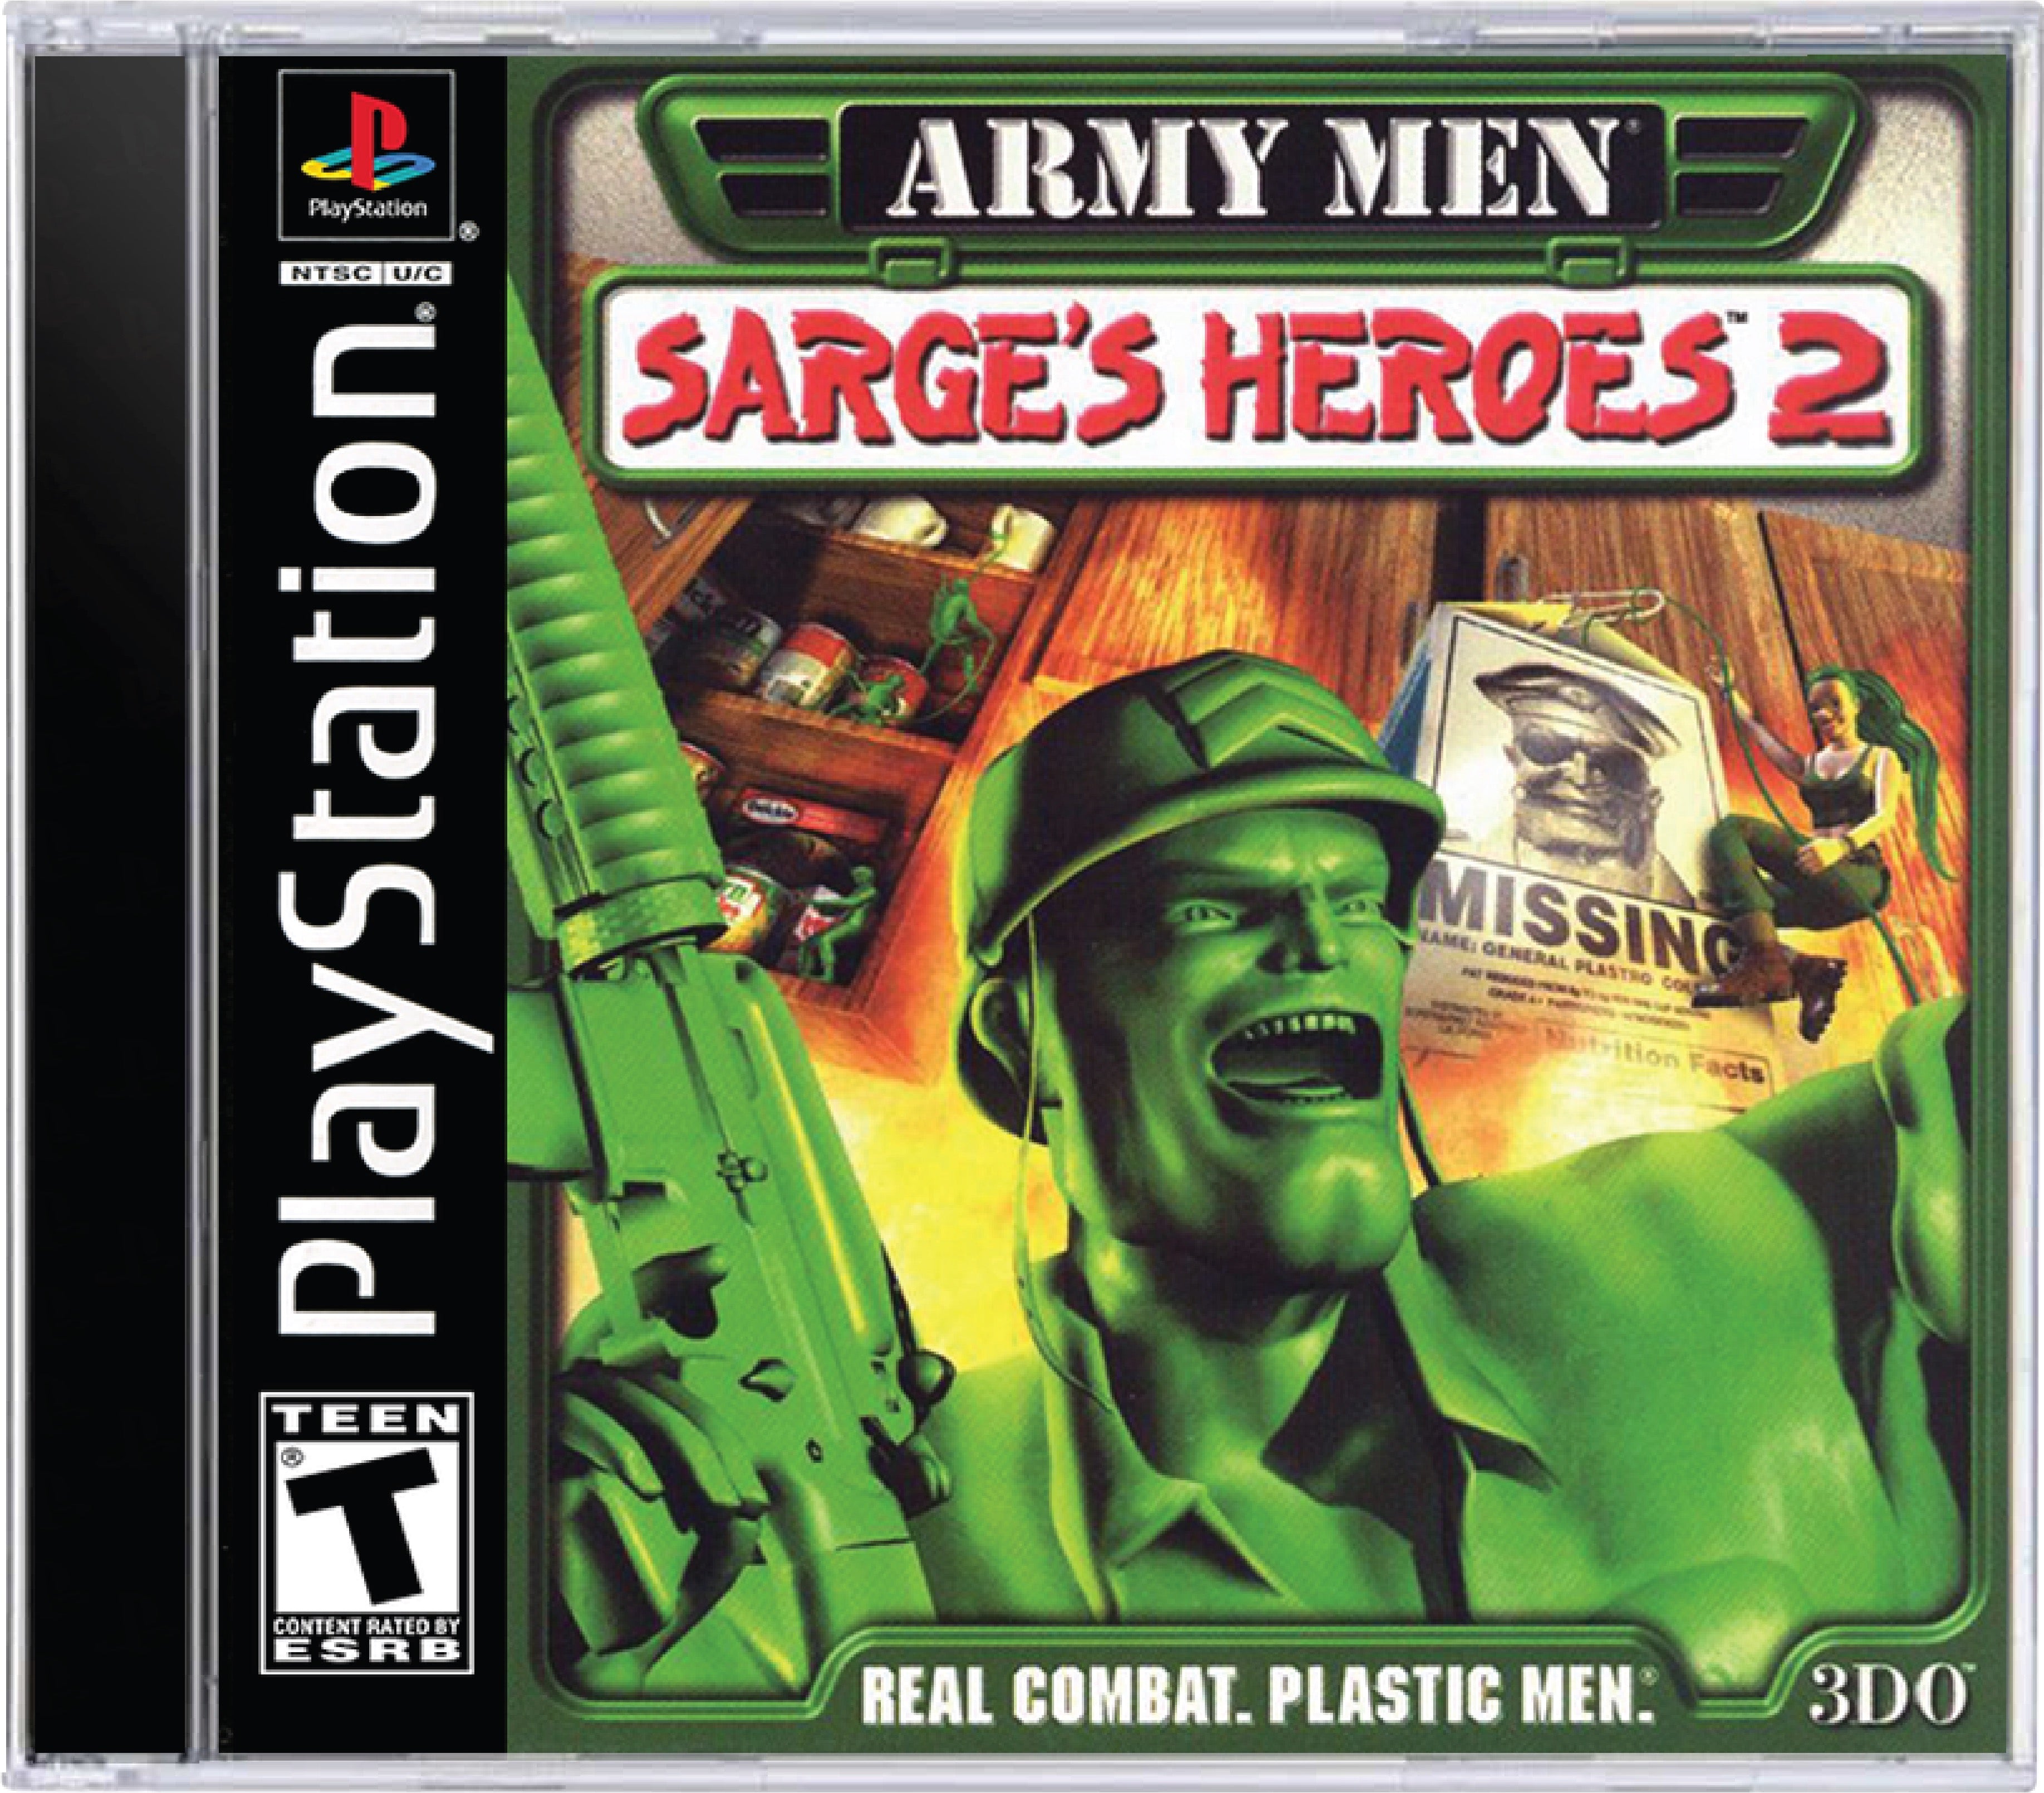 Army Men Sarge's Heroes 2 Cover Art and Product Photo